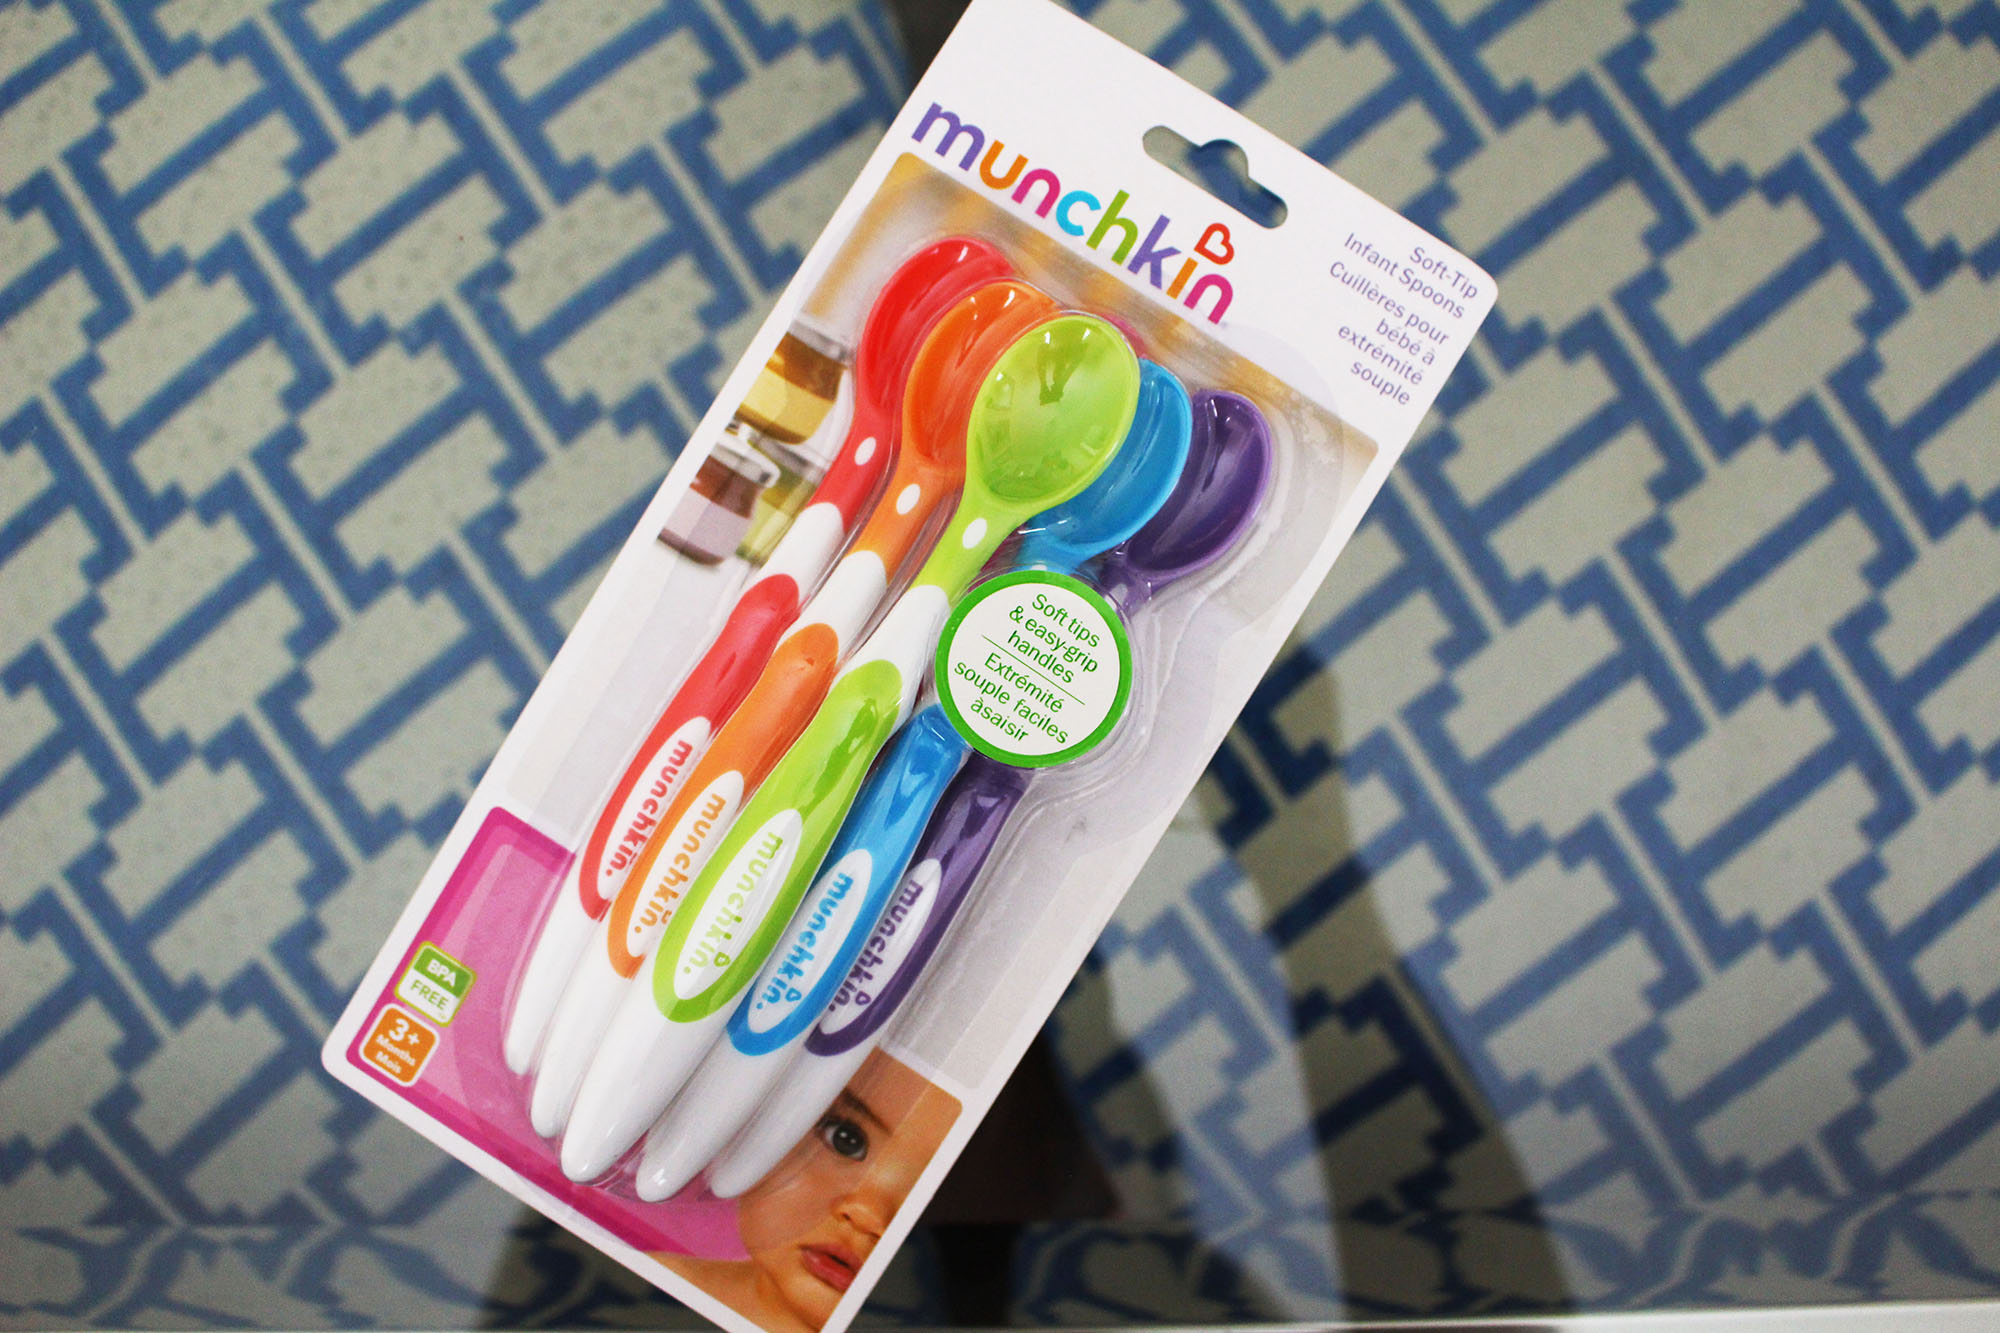 Munchkin White Hot Spoons reviews in Baby Food - ChickAdvisor